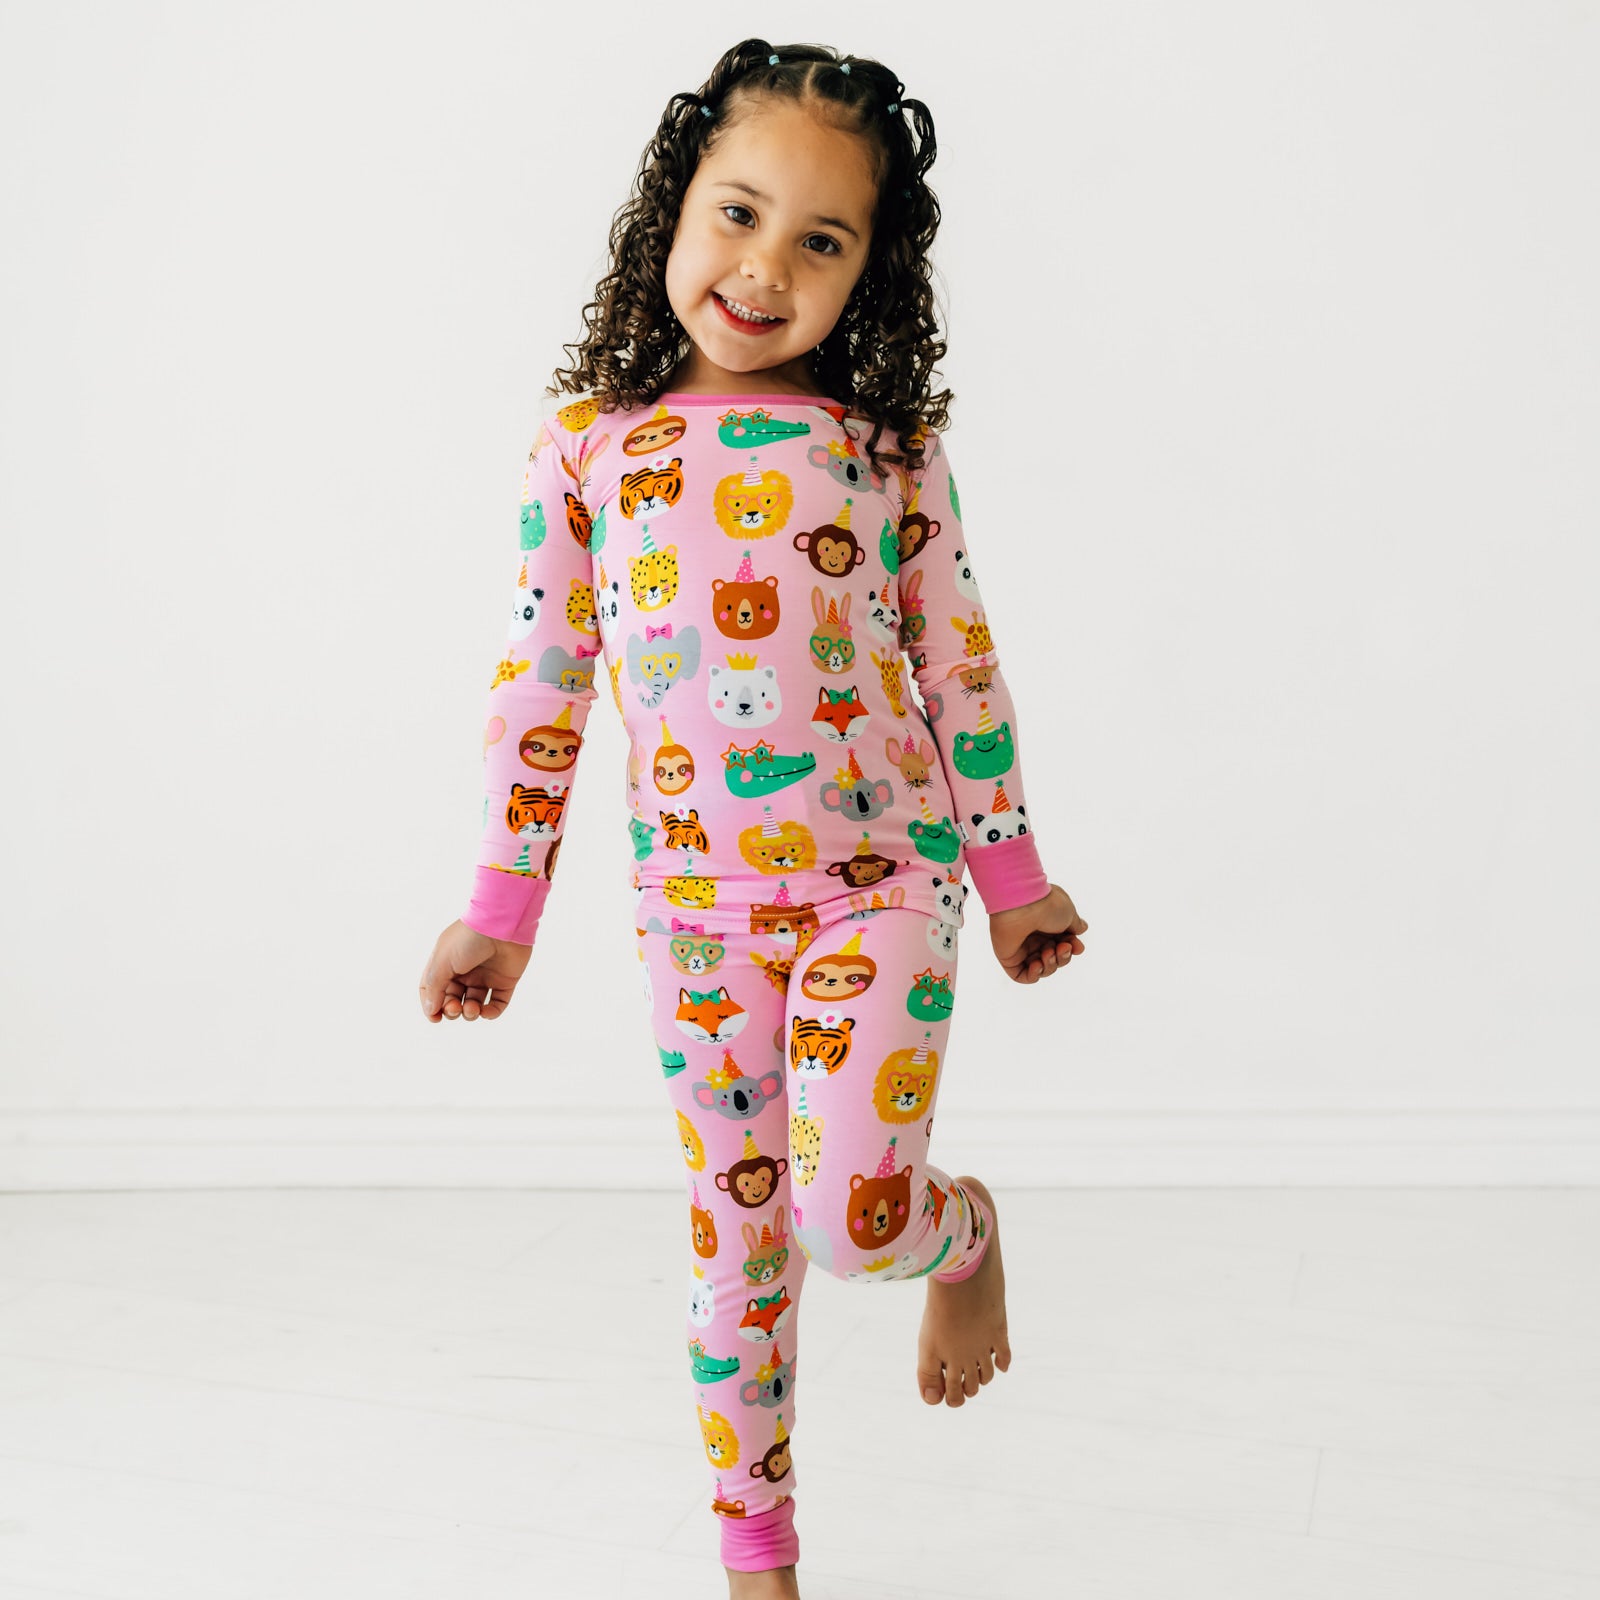 Alternate image of a child posing wearing a Pink Party Pals two piece pj set